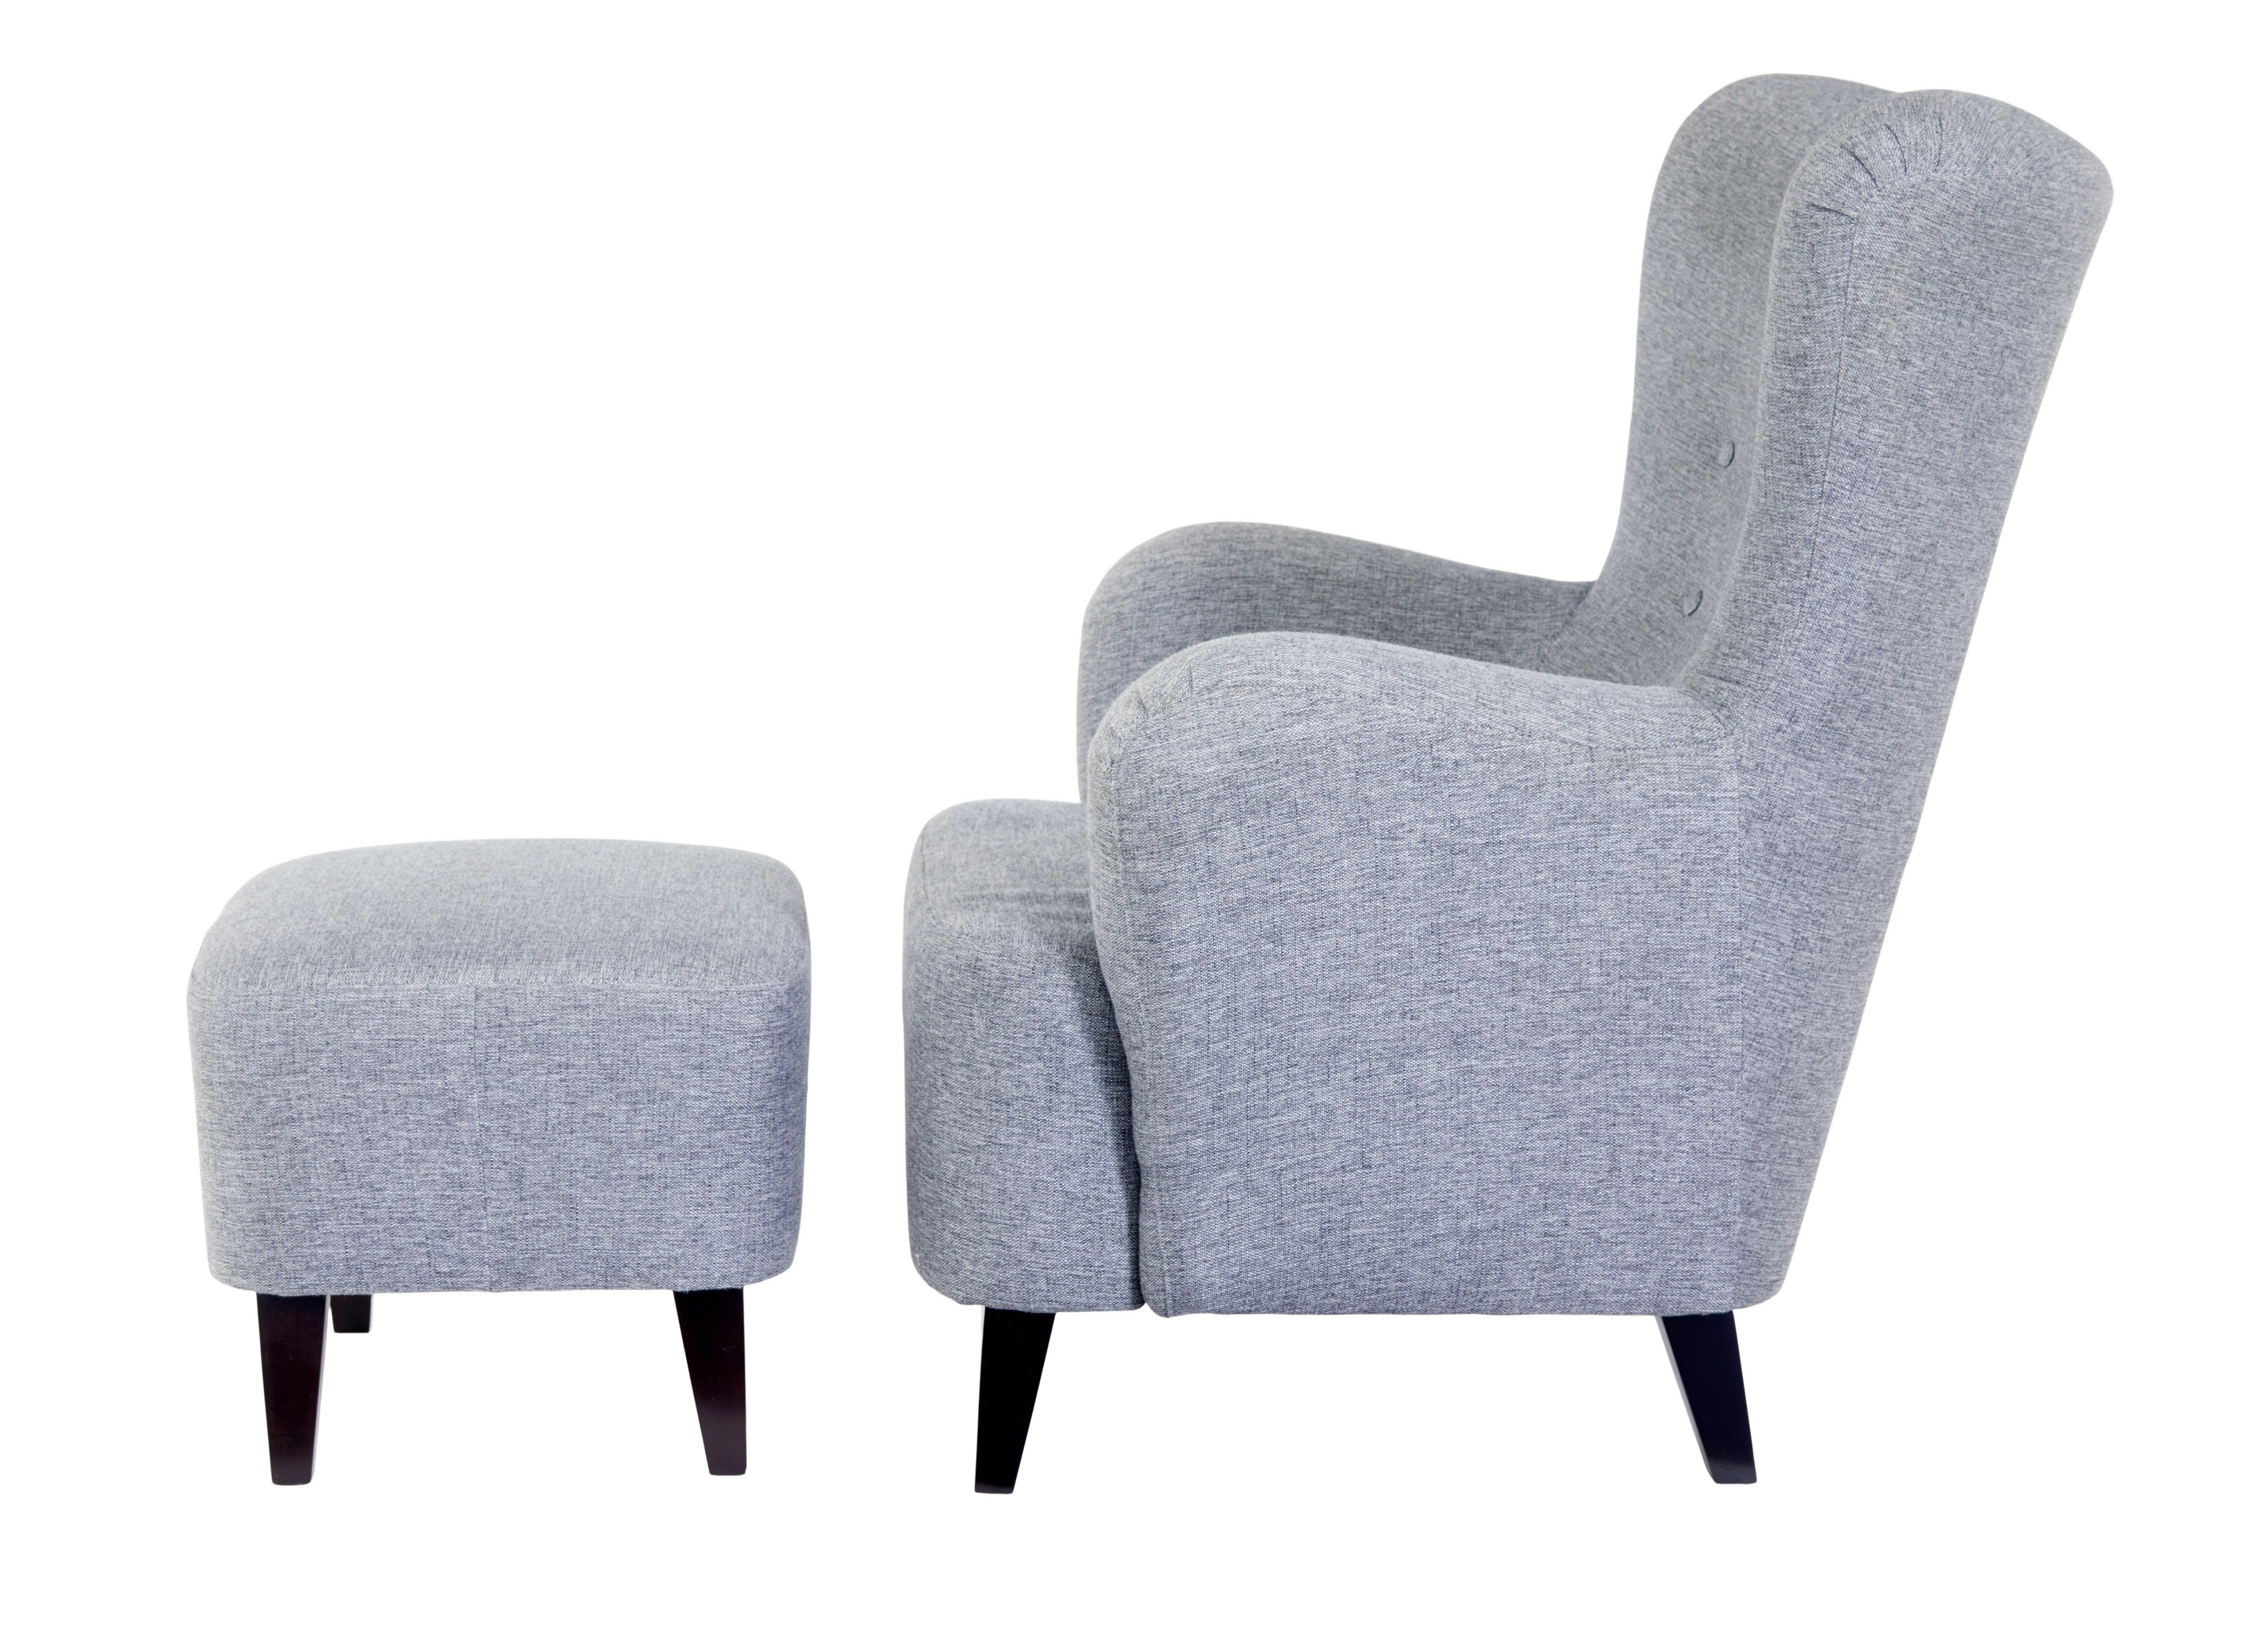 Contemporary Scandinavian grace armchair with stool circa 2004.

Elegant piece of Scandinavian design. Shaped wing back head rest, with buttoned detailing.  Scrolled arms complete a comfortable seating experience.  Complete with matching stool, all